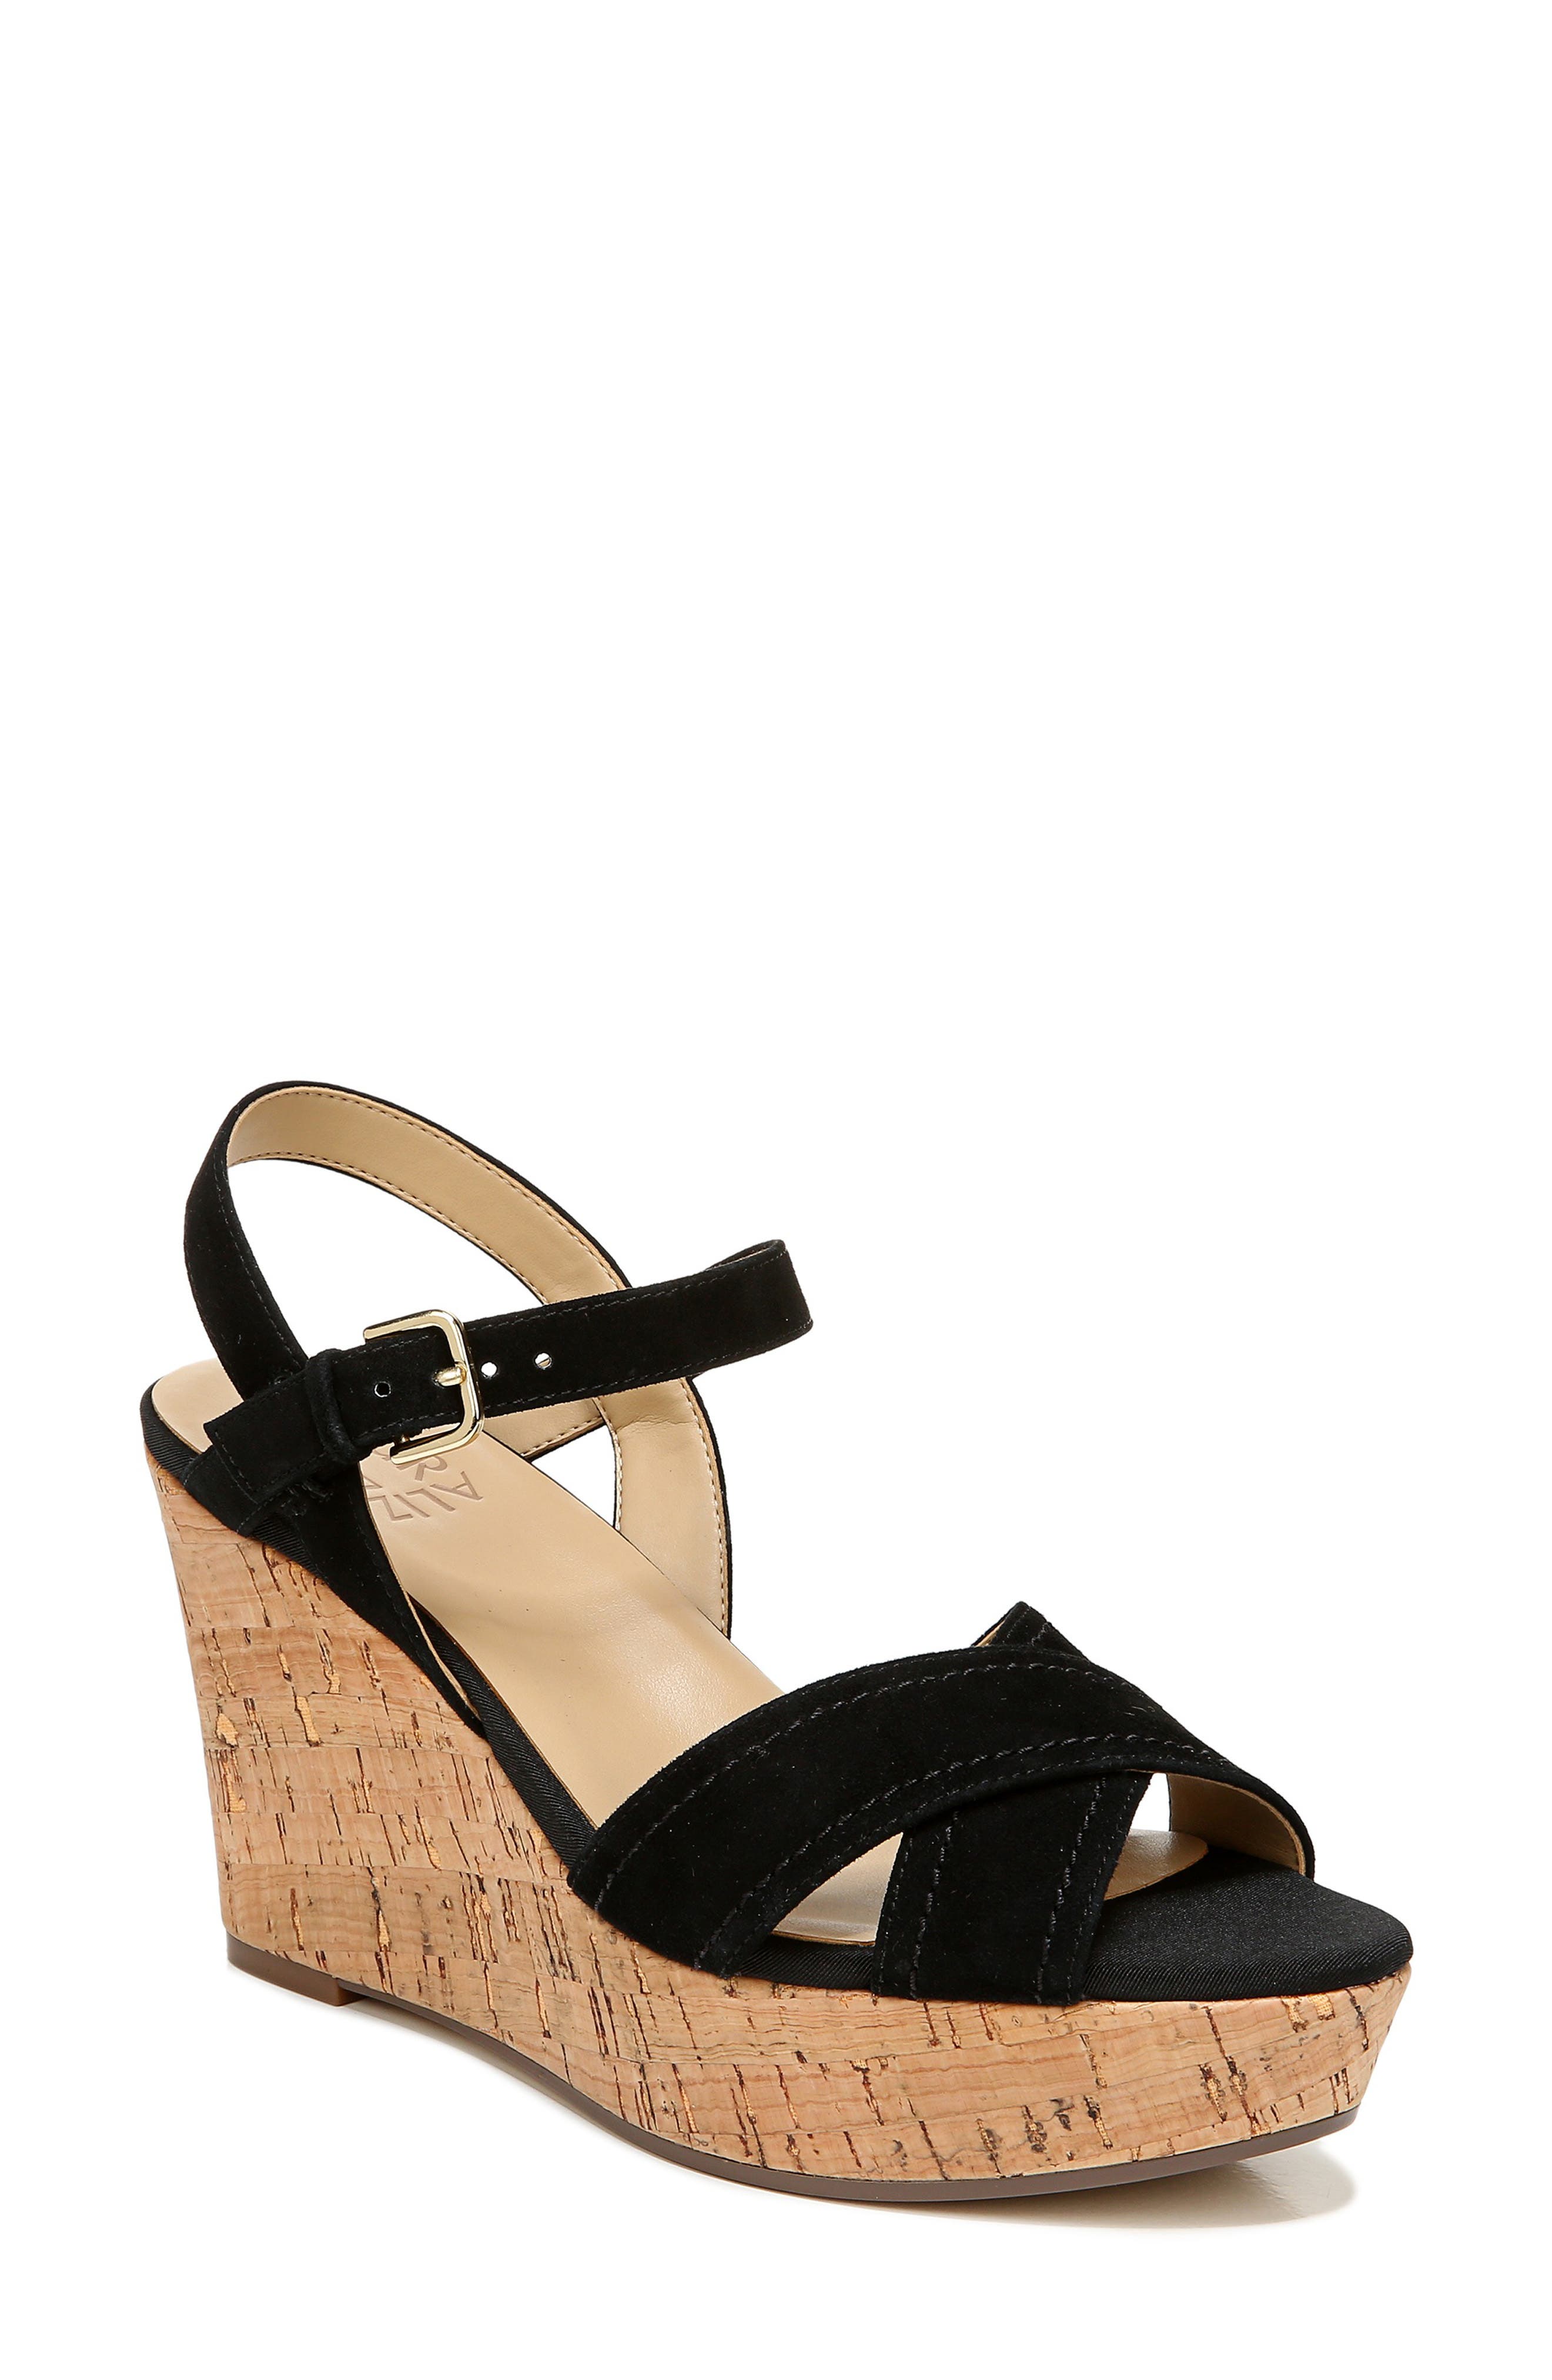 nordstrom wedge shoes